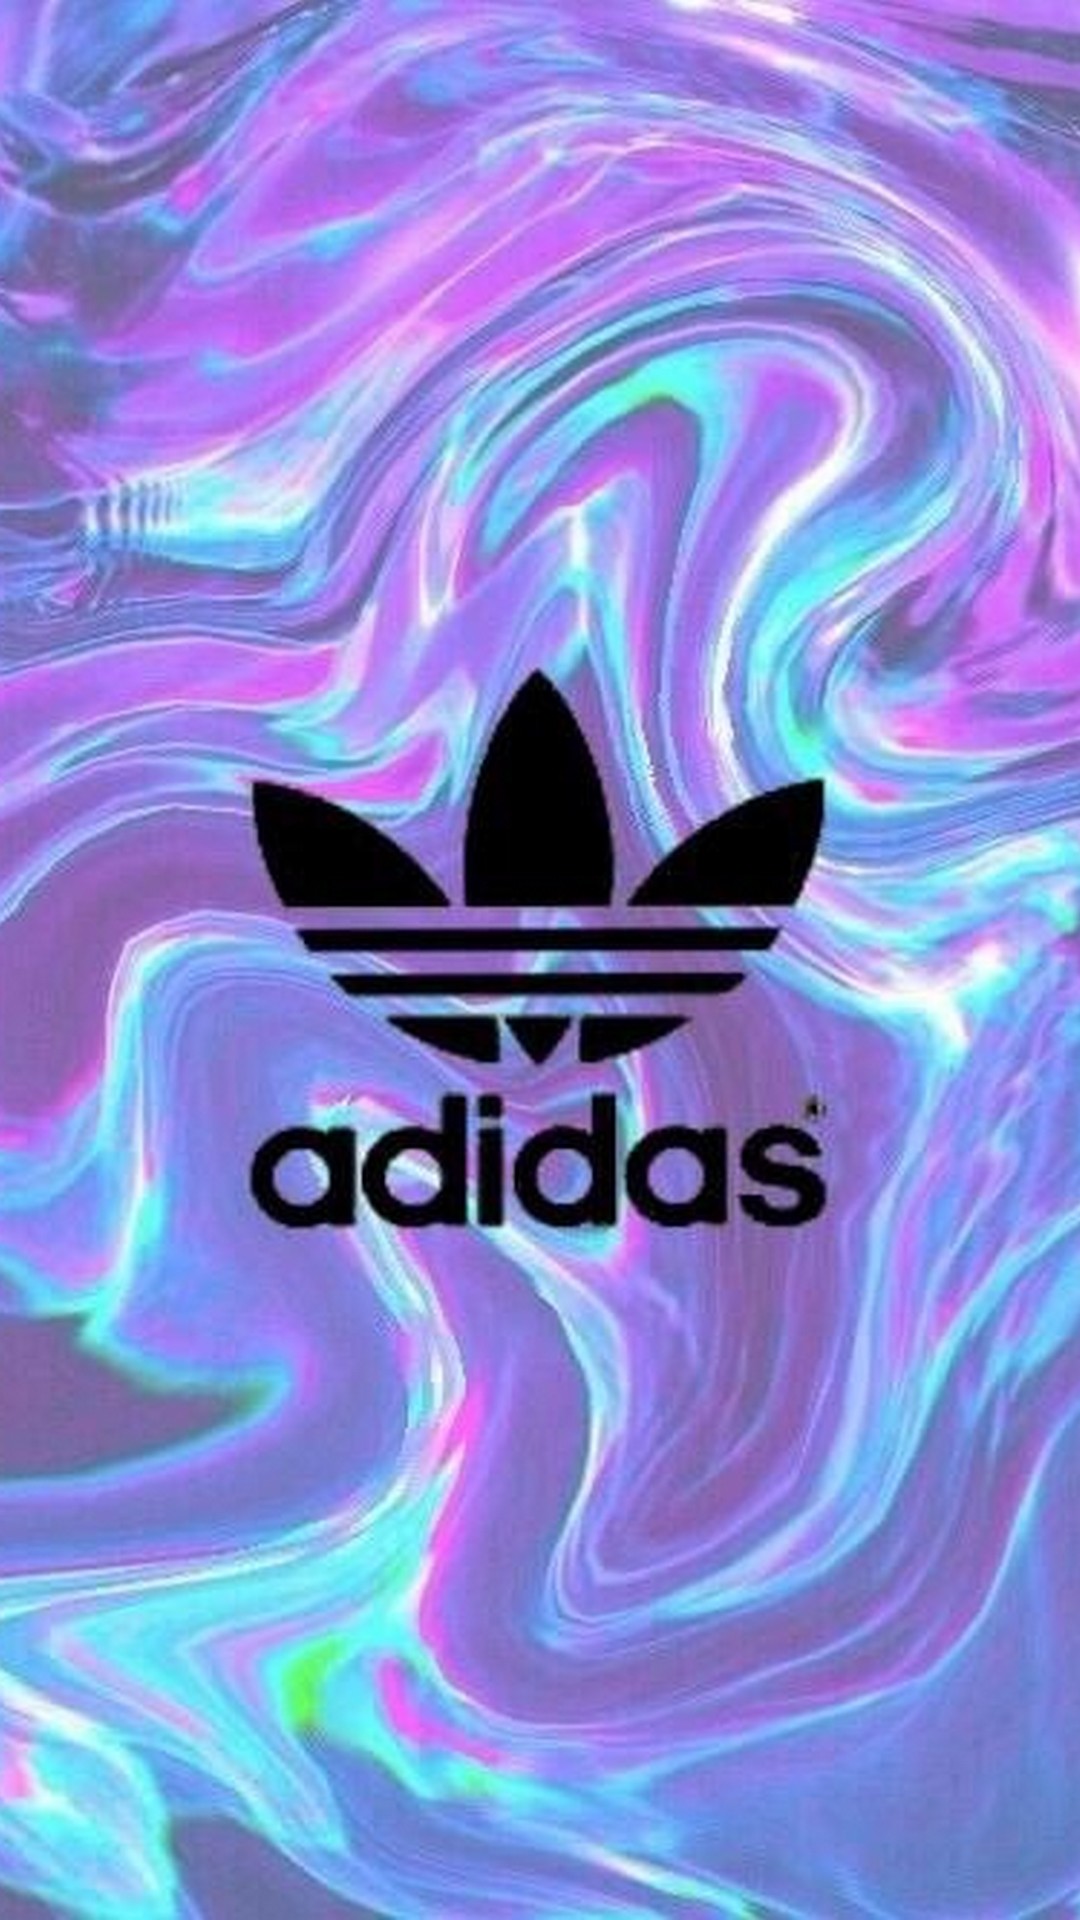 Adidas Wallpaper iPhone with high-resolution 1080x1920 pixel. You can use this wallpaper for your Windows and Mac OS computers as well as your Android and iPhone smartphones